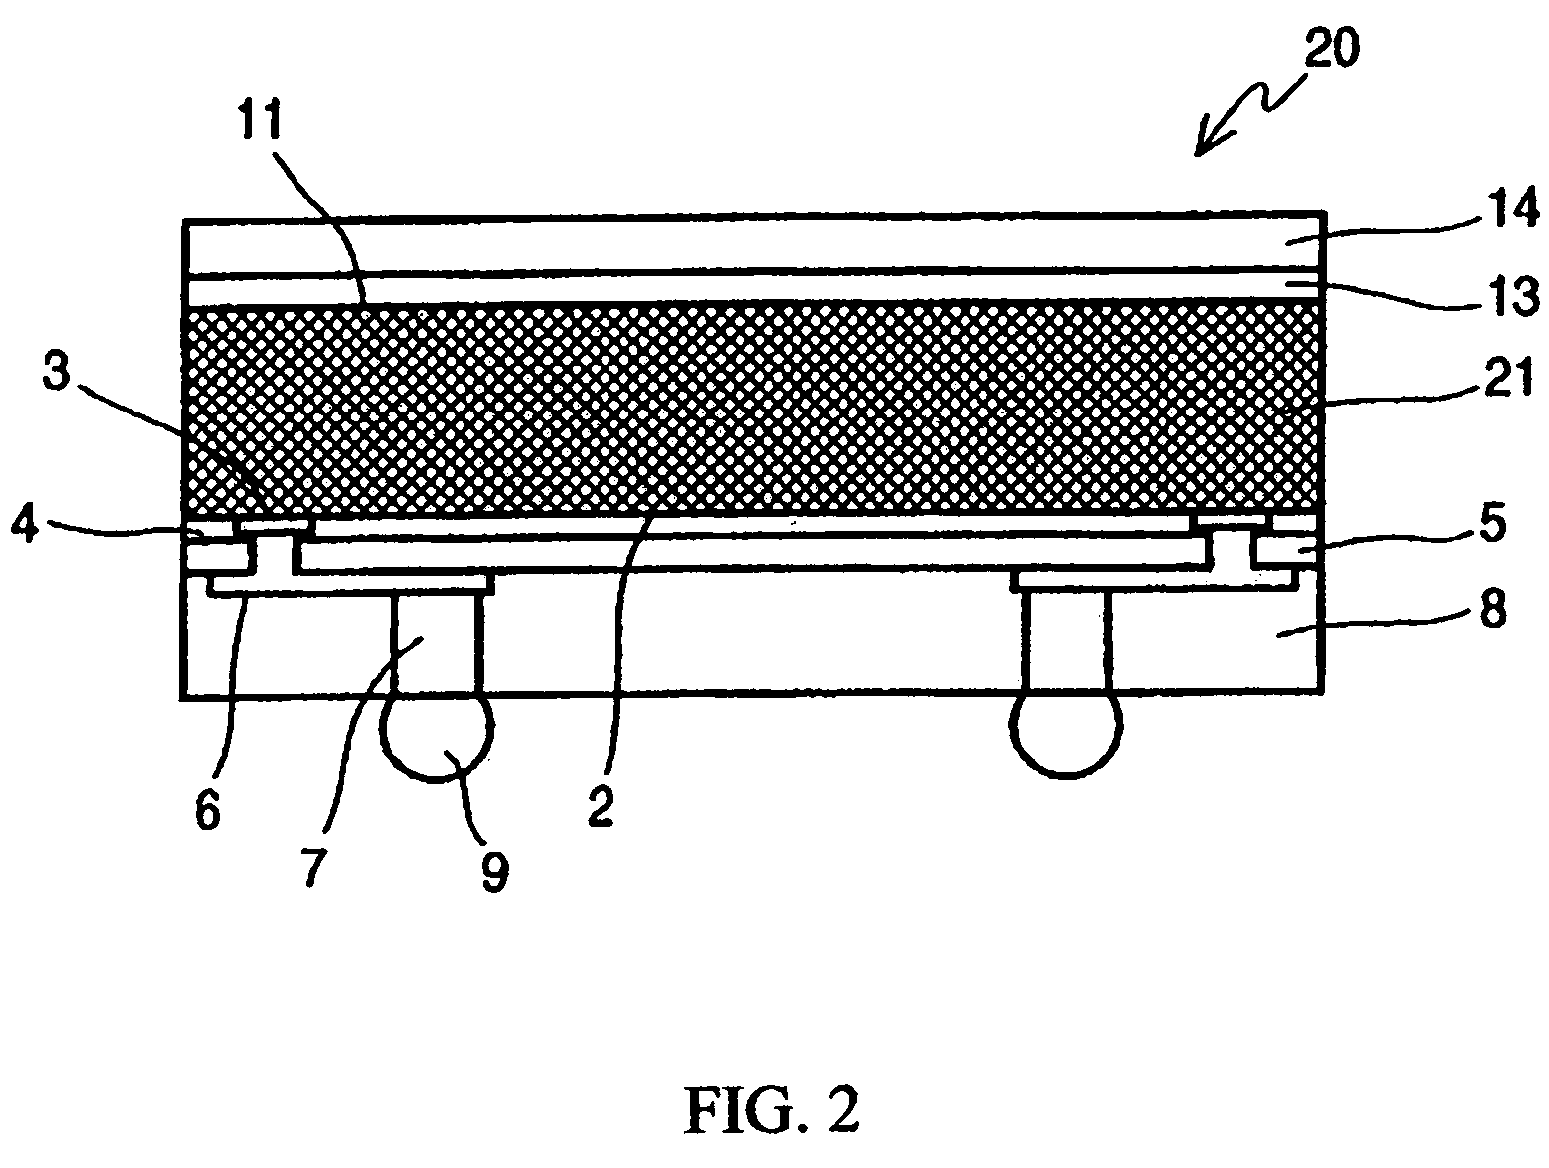 Semiconductor device and method of producing the same